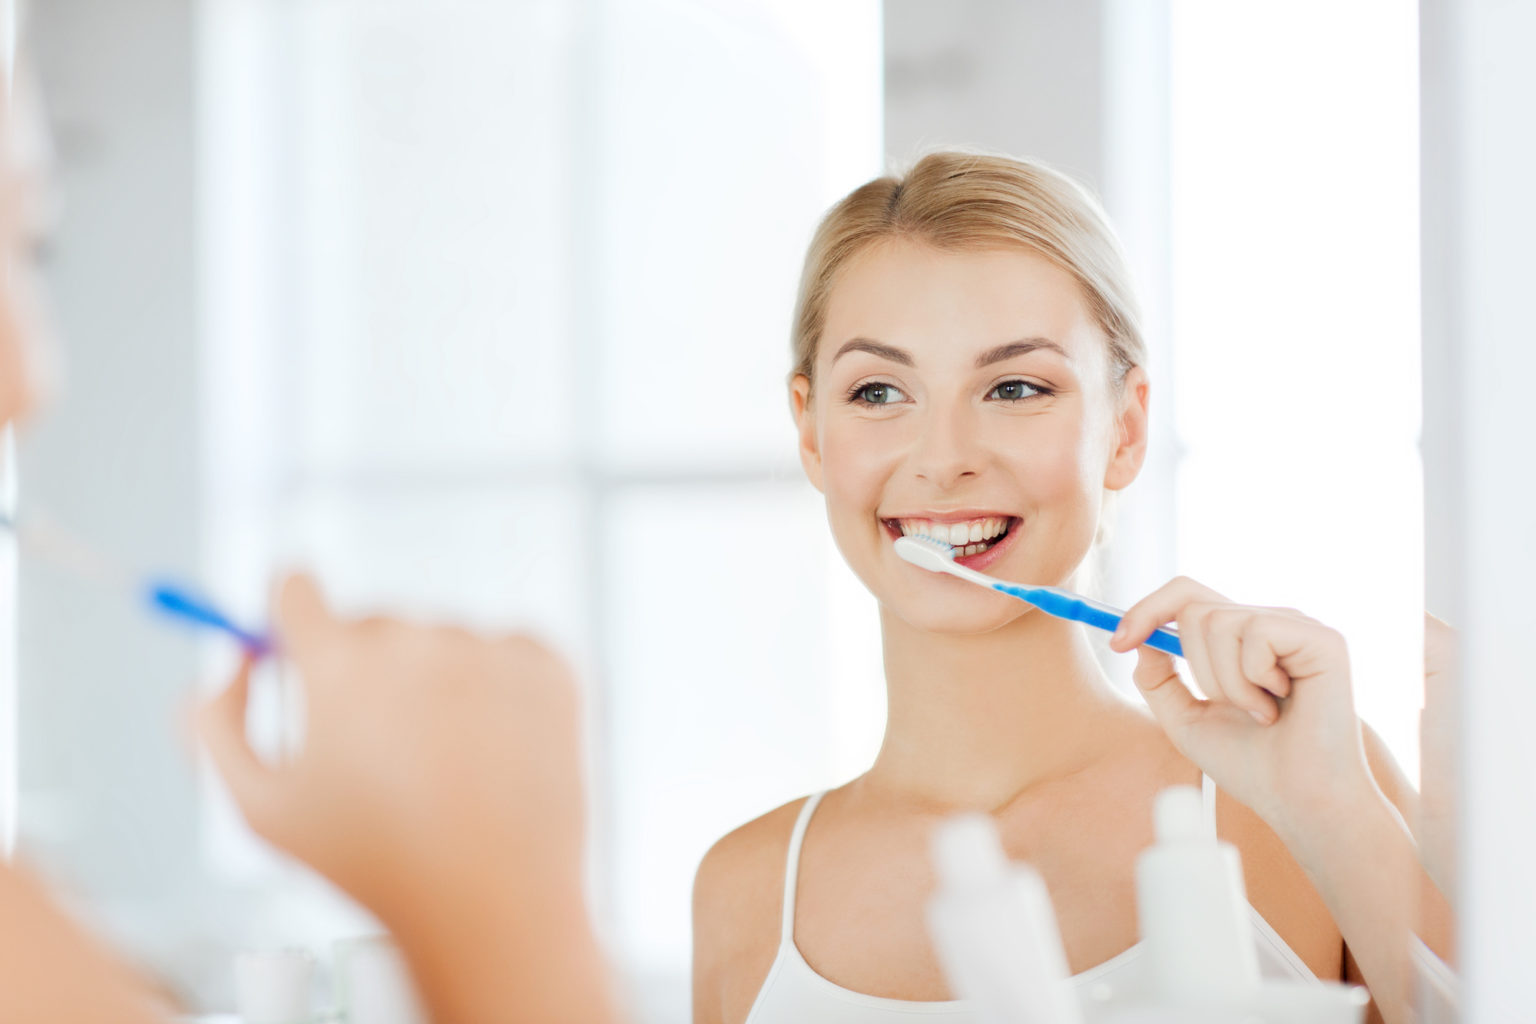 How Often Should I Replace My Toothbrush The Answer May Surprise You